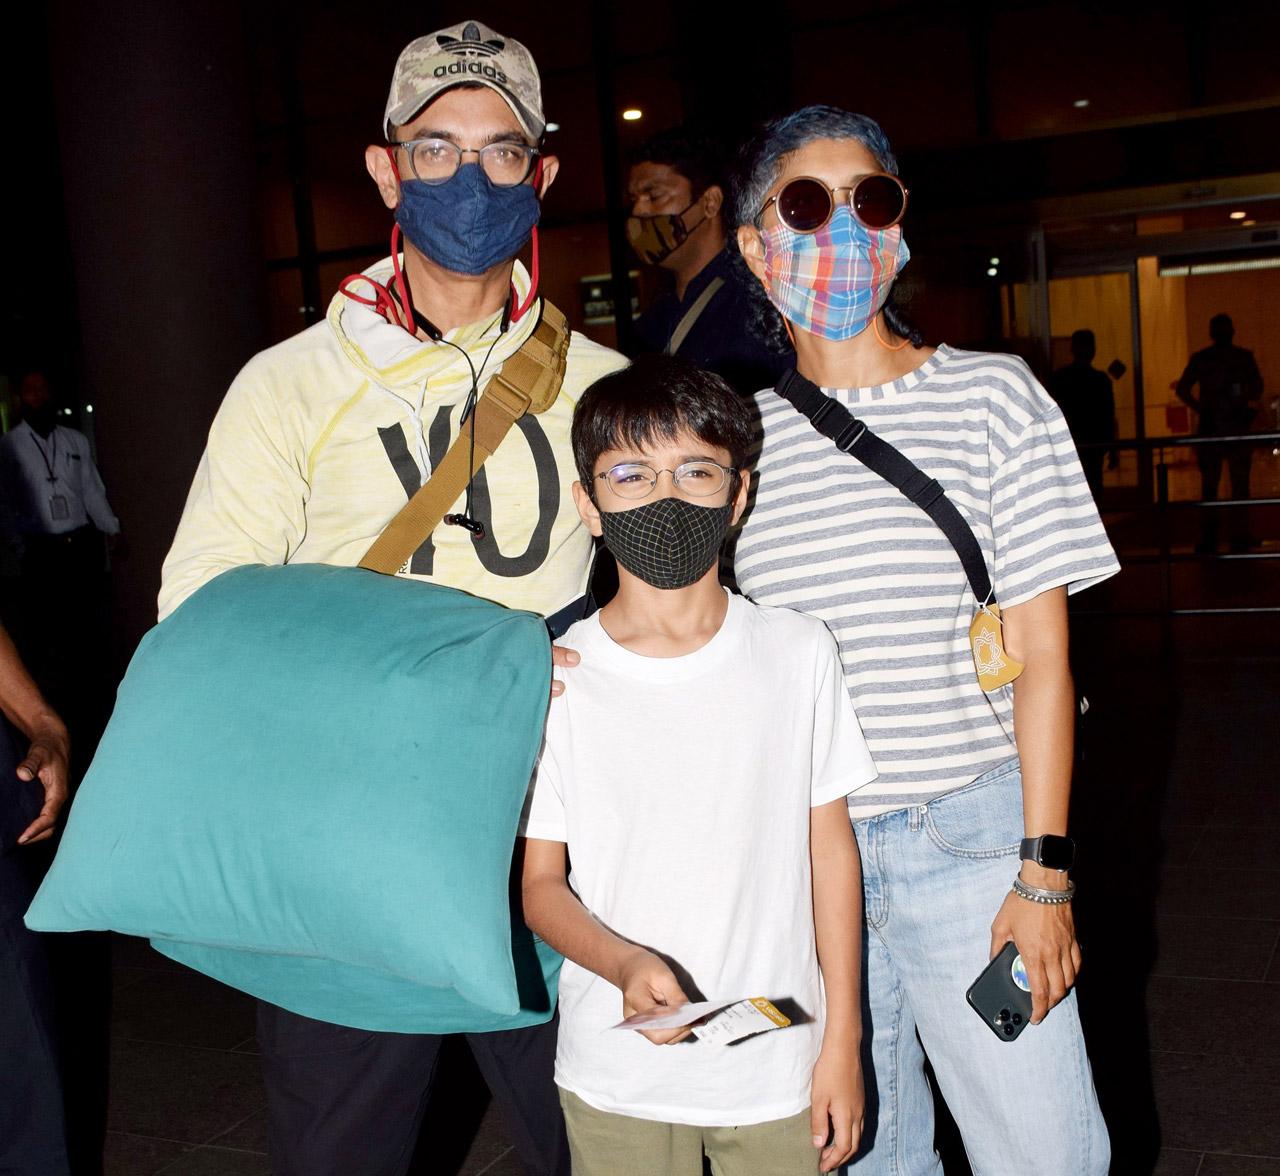 Aamir Khan with his wife Kiran Rao and son Azad Rao Khan were spotted at the Mumbai airport. Aamir is returning from Ladakh and J&K where he had gone to shoot for his next Laal Singh Chaddha.